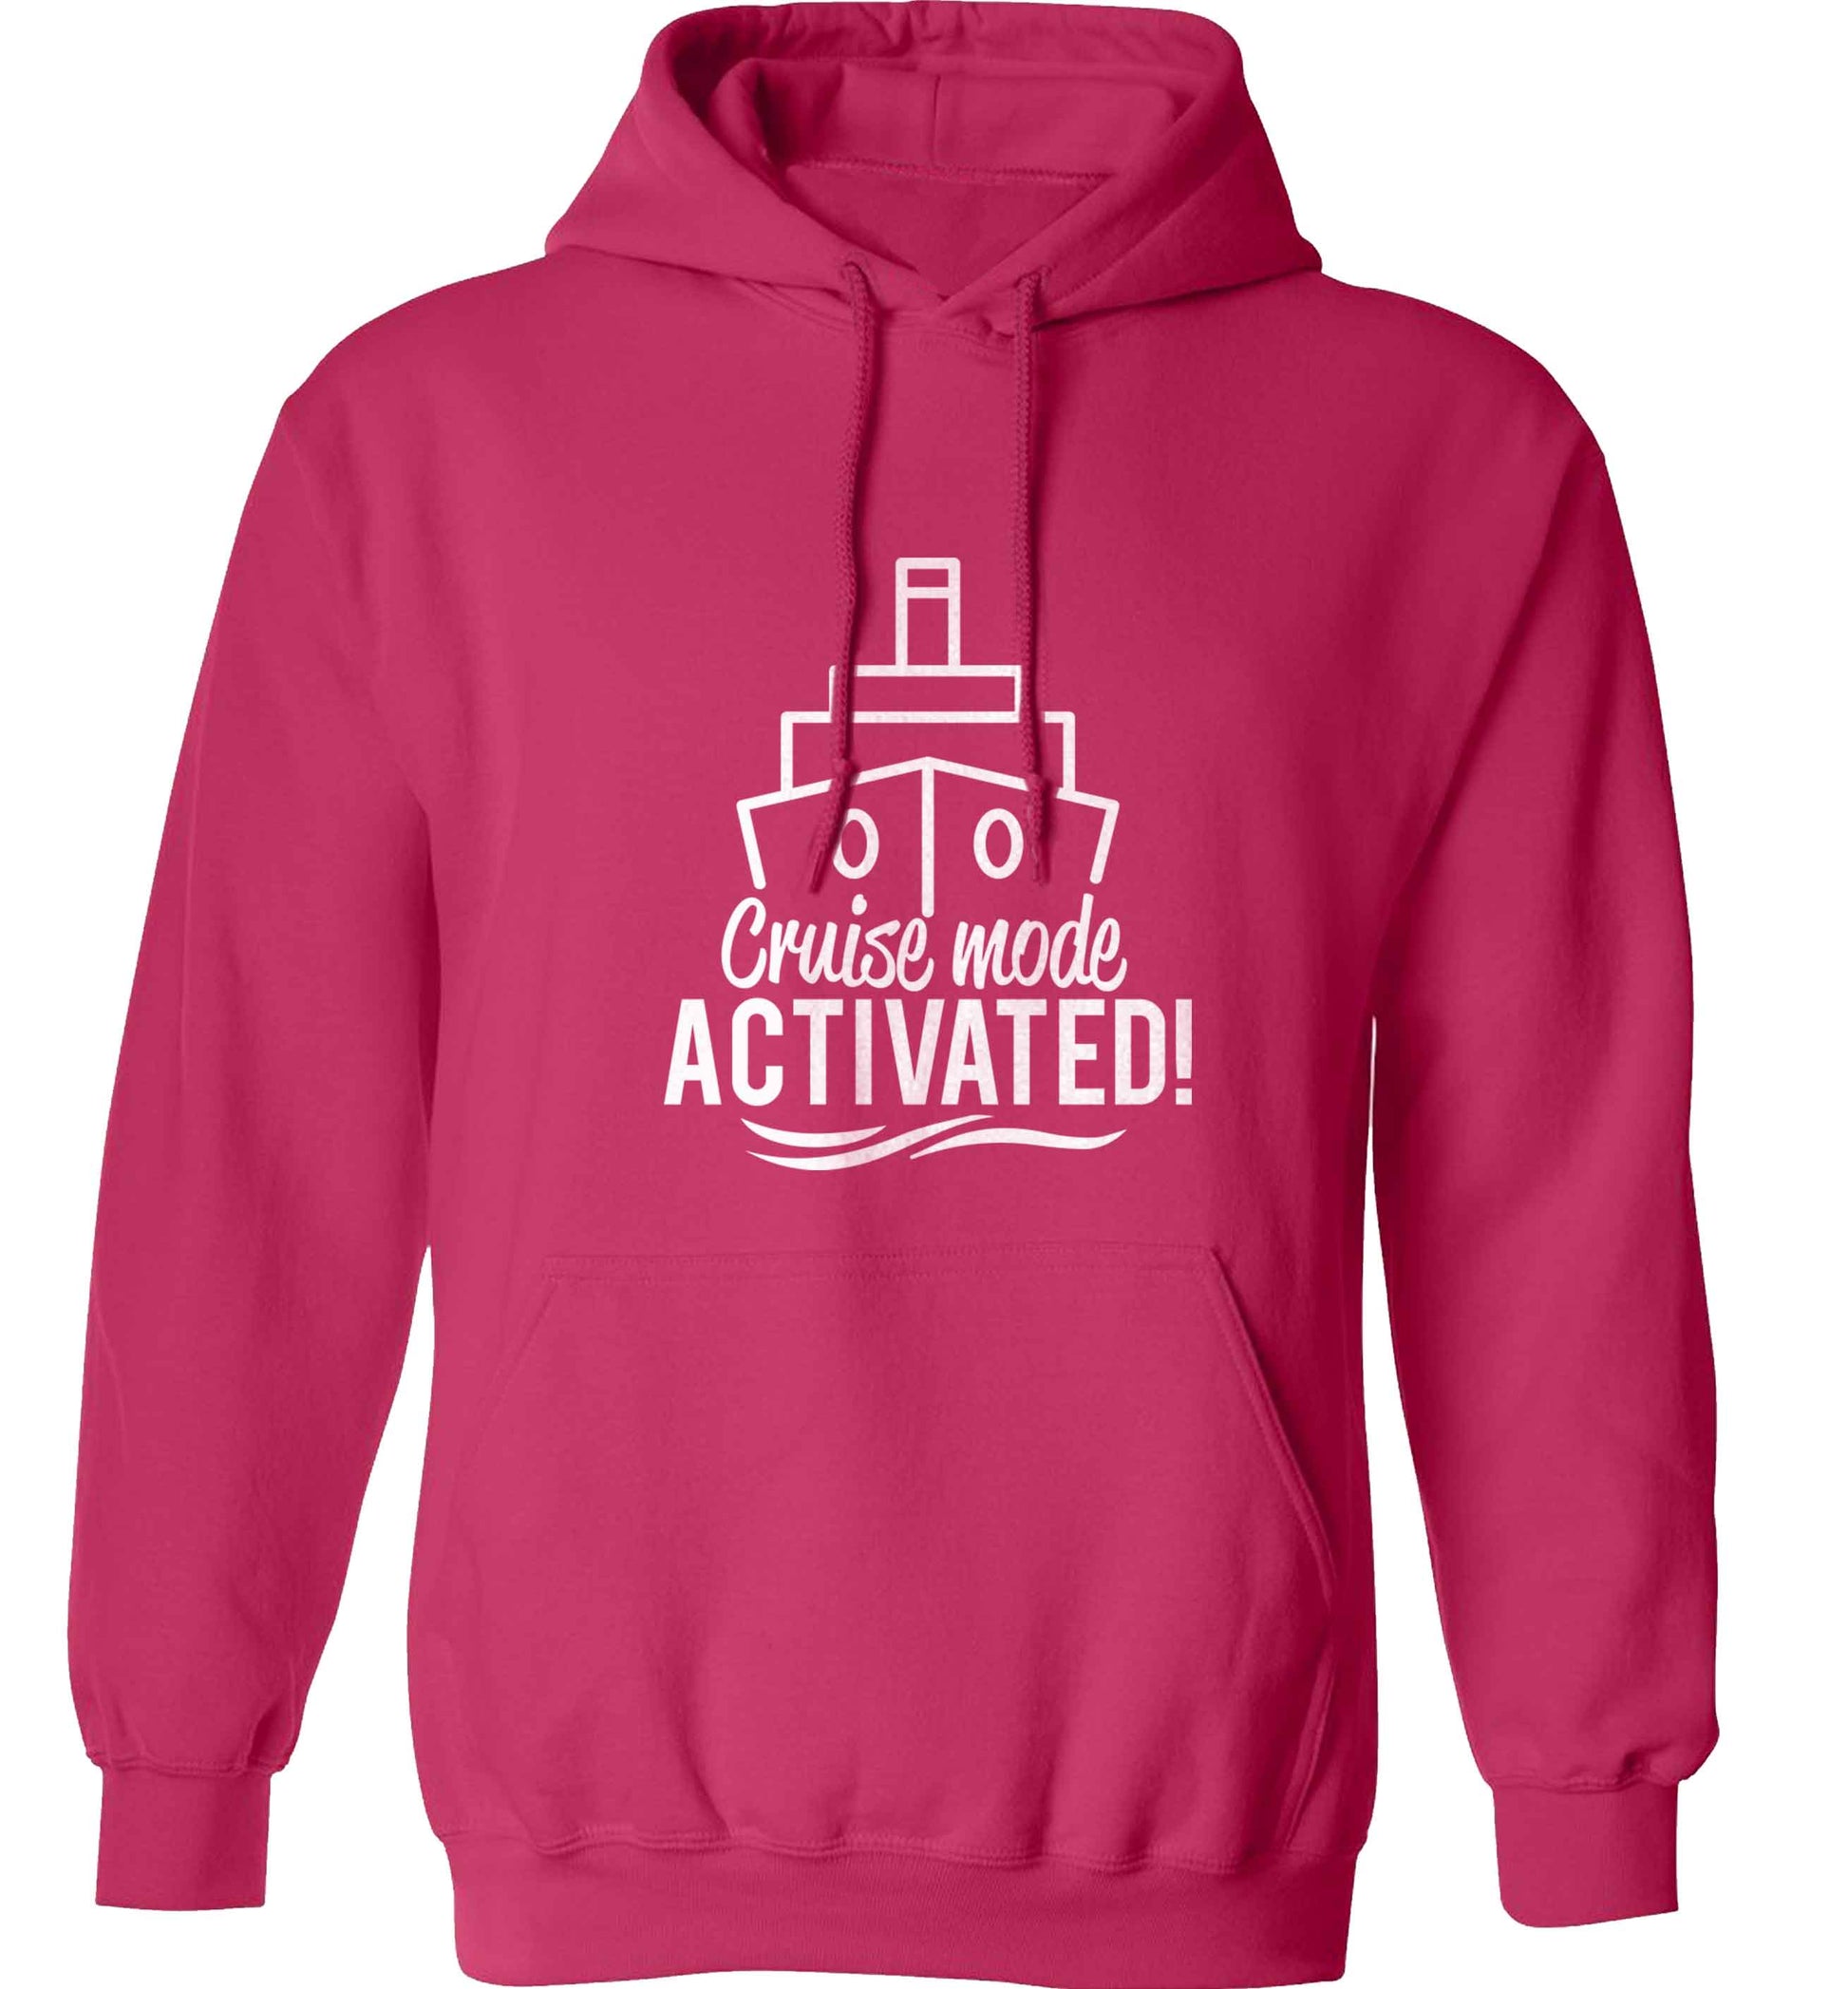 Cruise mode activated adults unisex pink hoodie 2XL